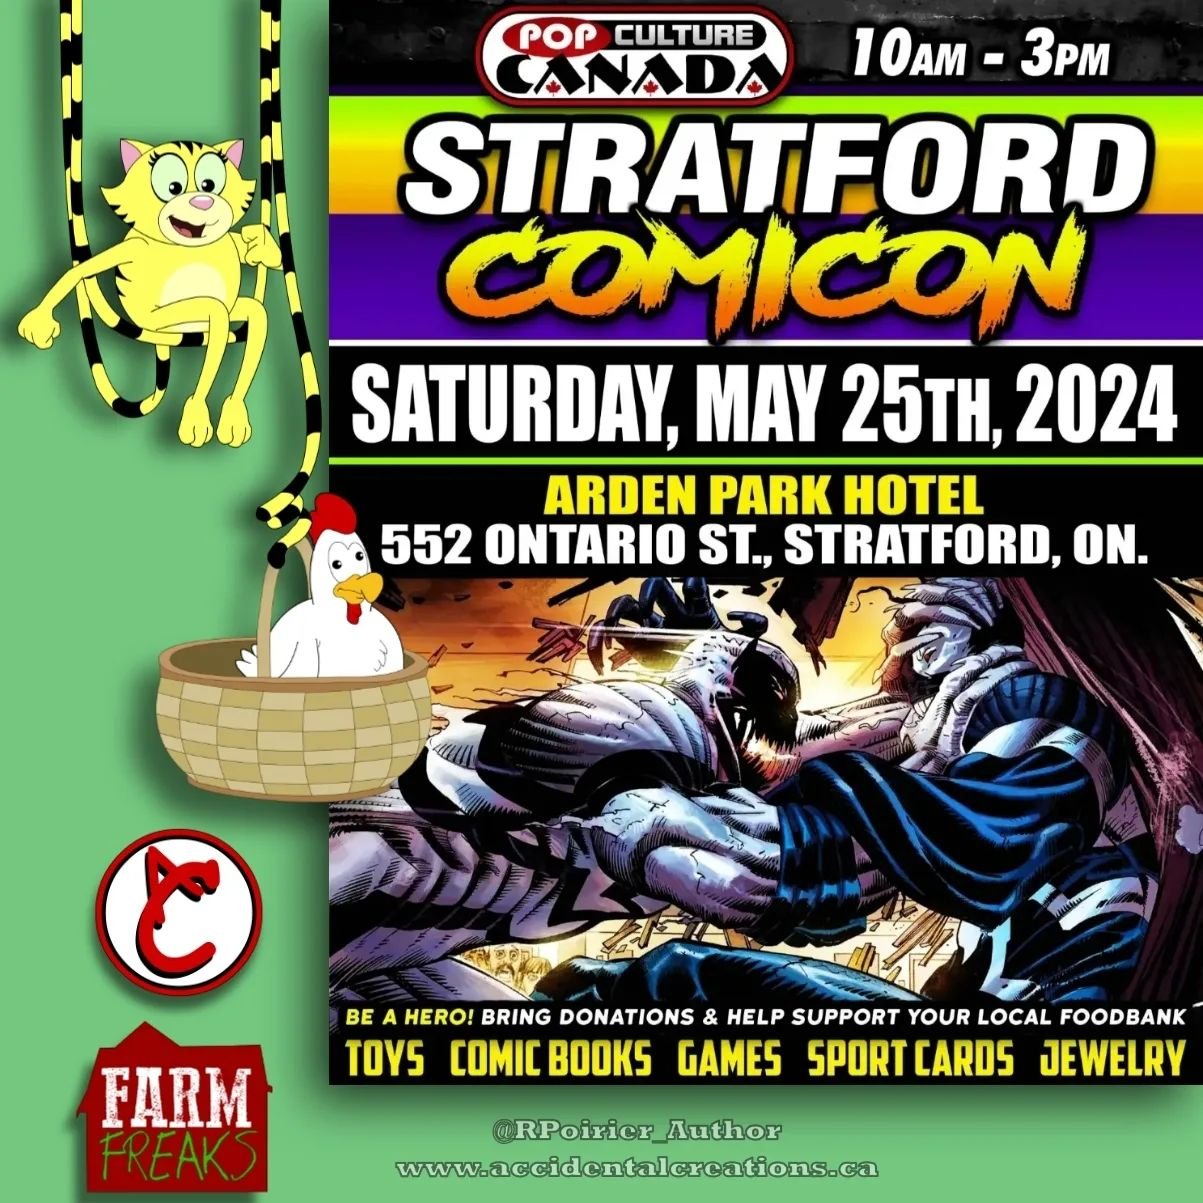 Join us on Saturday, May 25th, at Stratford Comicon with @pop_culture_canada 
🐄 Step into the hilarious and fantastical world of Farm Freaks, where misfit animals embrace their quirks and embark on wild adventures. 
🐮&quot;Farm Freaks is a 7-part g